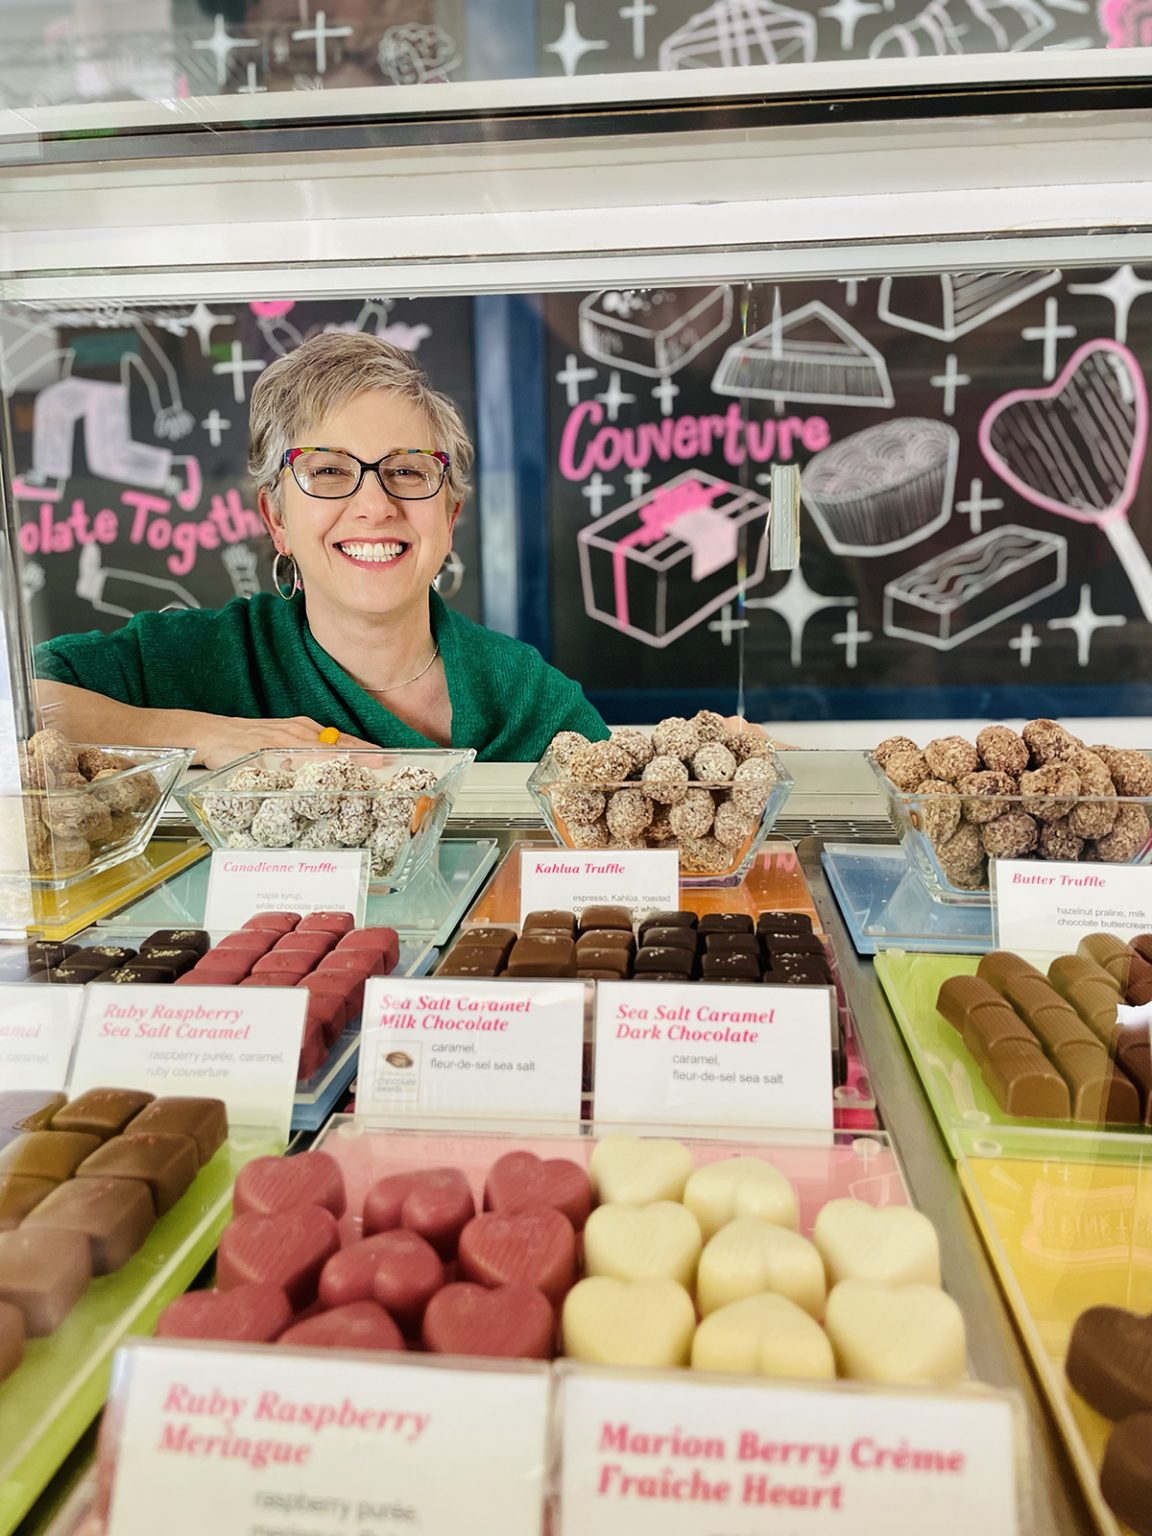 A smiling woman with grey hair and a green shirt stands in front of a stand with chocolates and confections.